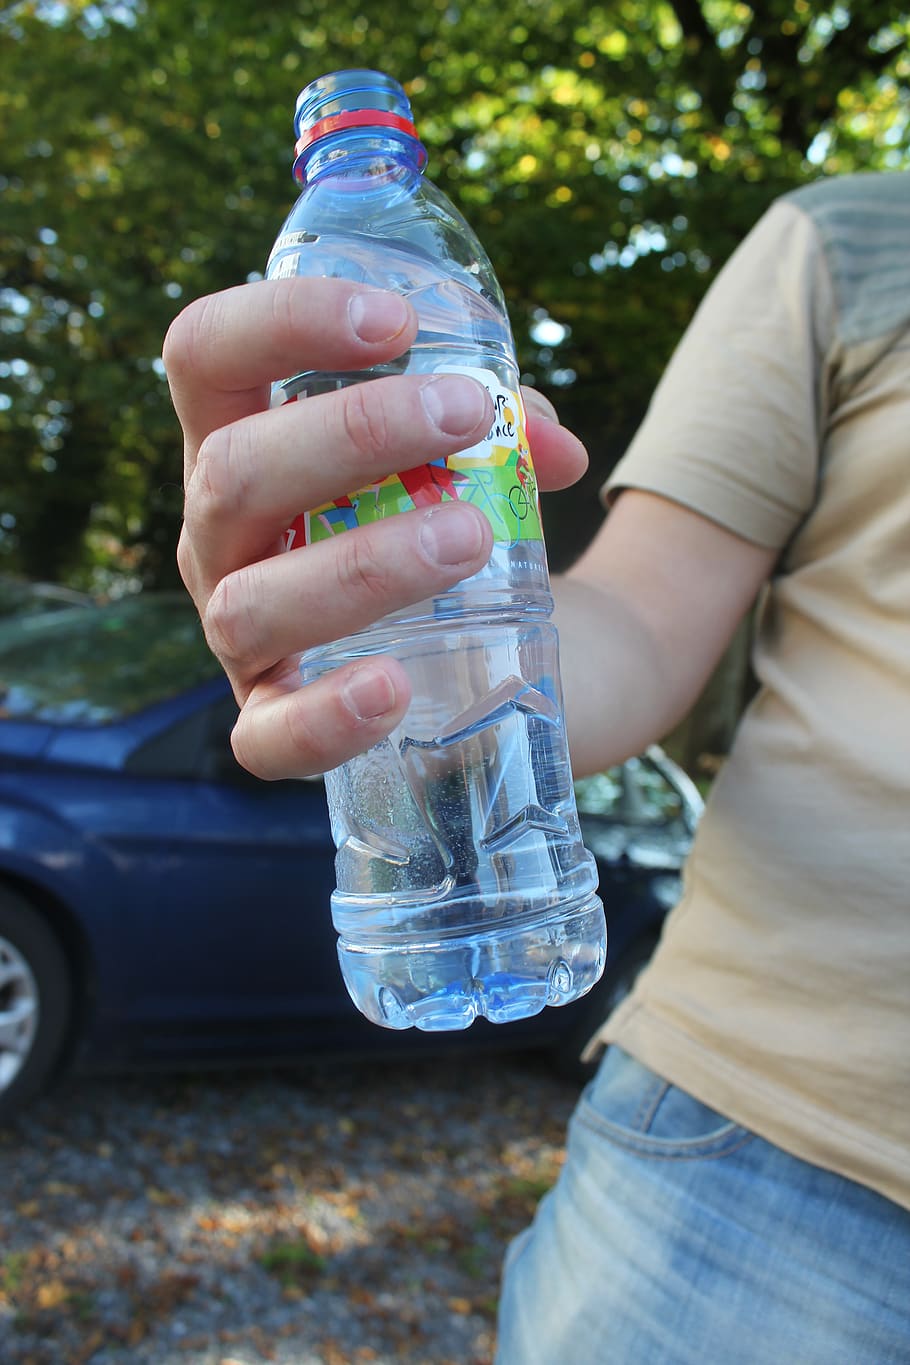 bottle, plastic bottle, bottle in hand, the water in the bottle, human hand, holding, hand, refreshment, day, real people